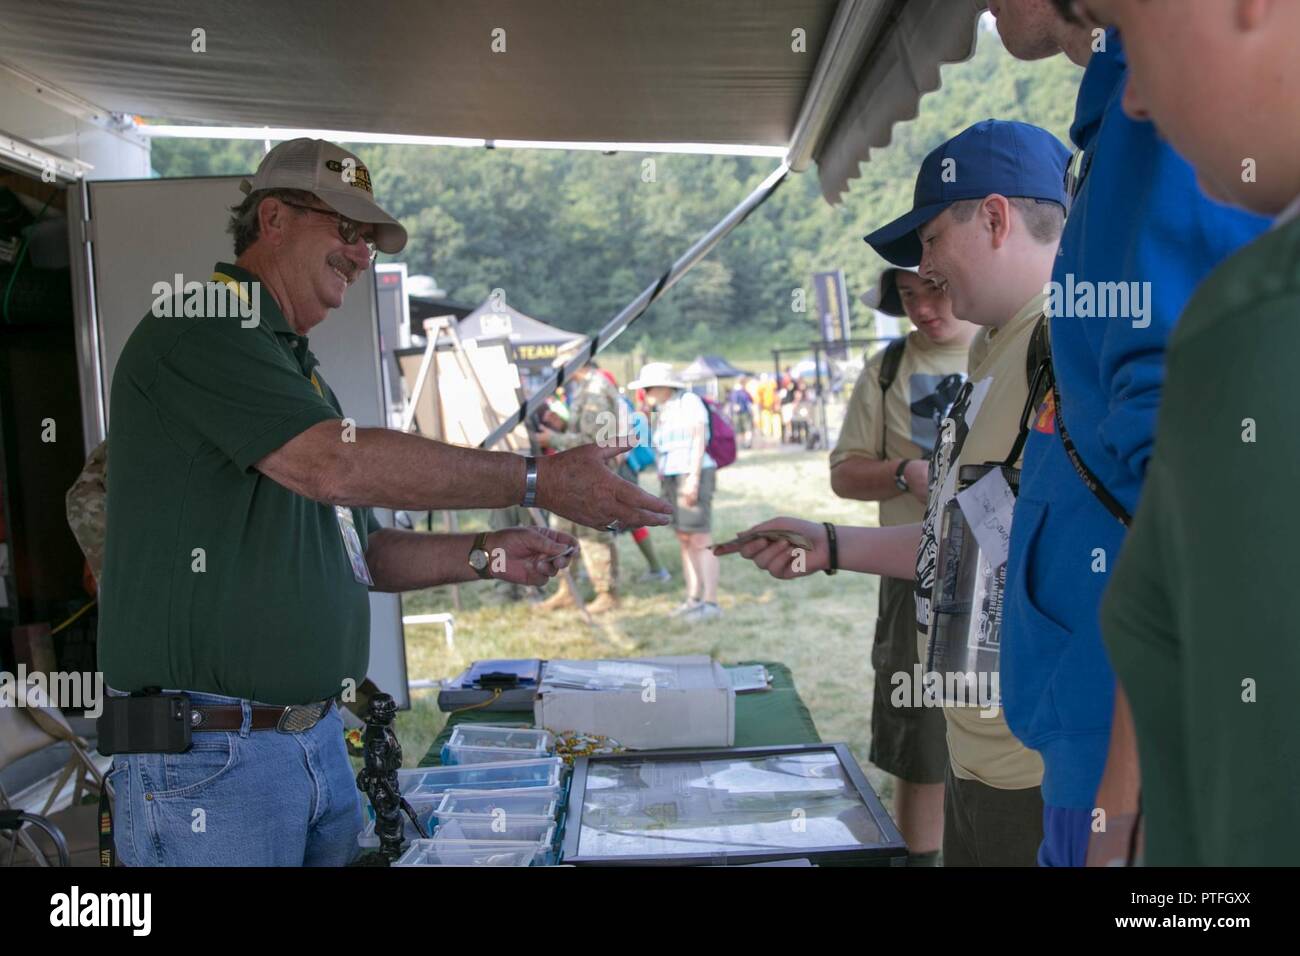 Dave Simmons, a Vietnam Veteran and West Virginia State Council President, sells historical war items to a Boy Scout at the West Virginia State Council Vietnam Veterans of America exhibit at the military exhibition site during the 2017 National Jamboree held at Summit Bechtel Reserve near Glen Jean, W.Va., July 21, 2017. The 2017 National Jamboree is being attended by 30,000 Boy Scouts, troop leaders, volunteers and professional staff members, as well as more than 15,000 visitors. Approximately 1,200 military members from the Department of Defense and the U.S. Coast Guard are providing logisti Stock Photo